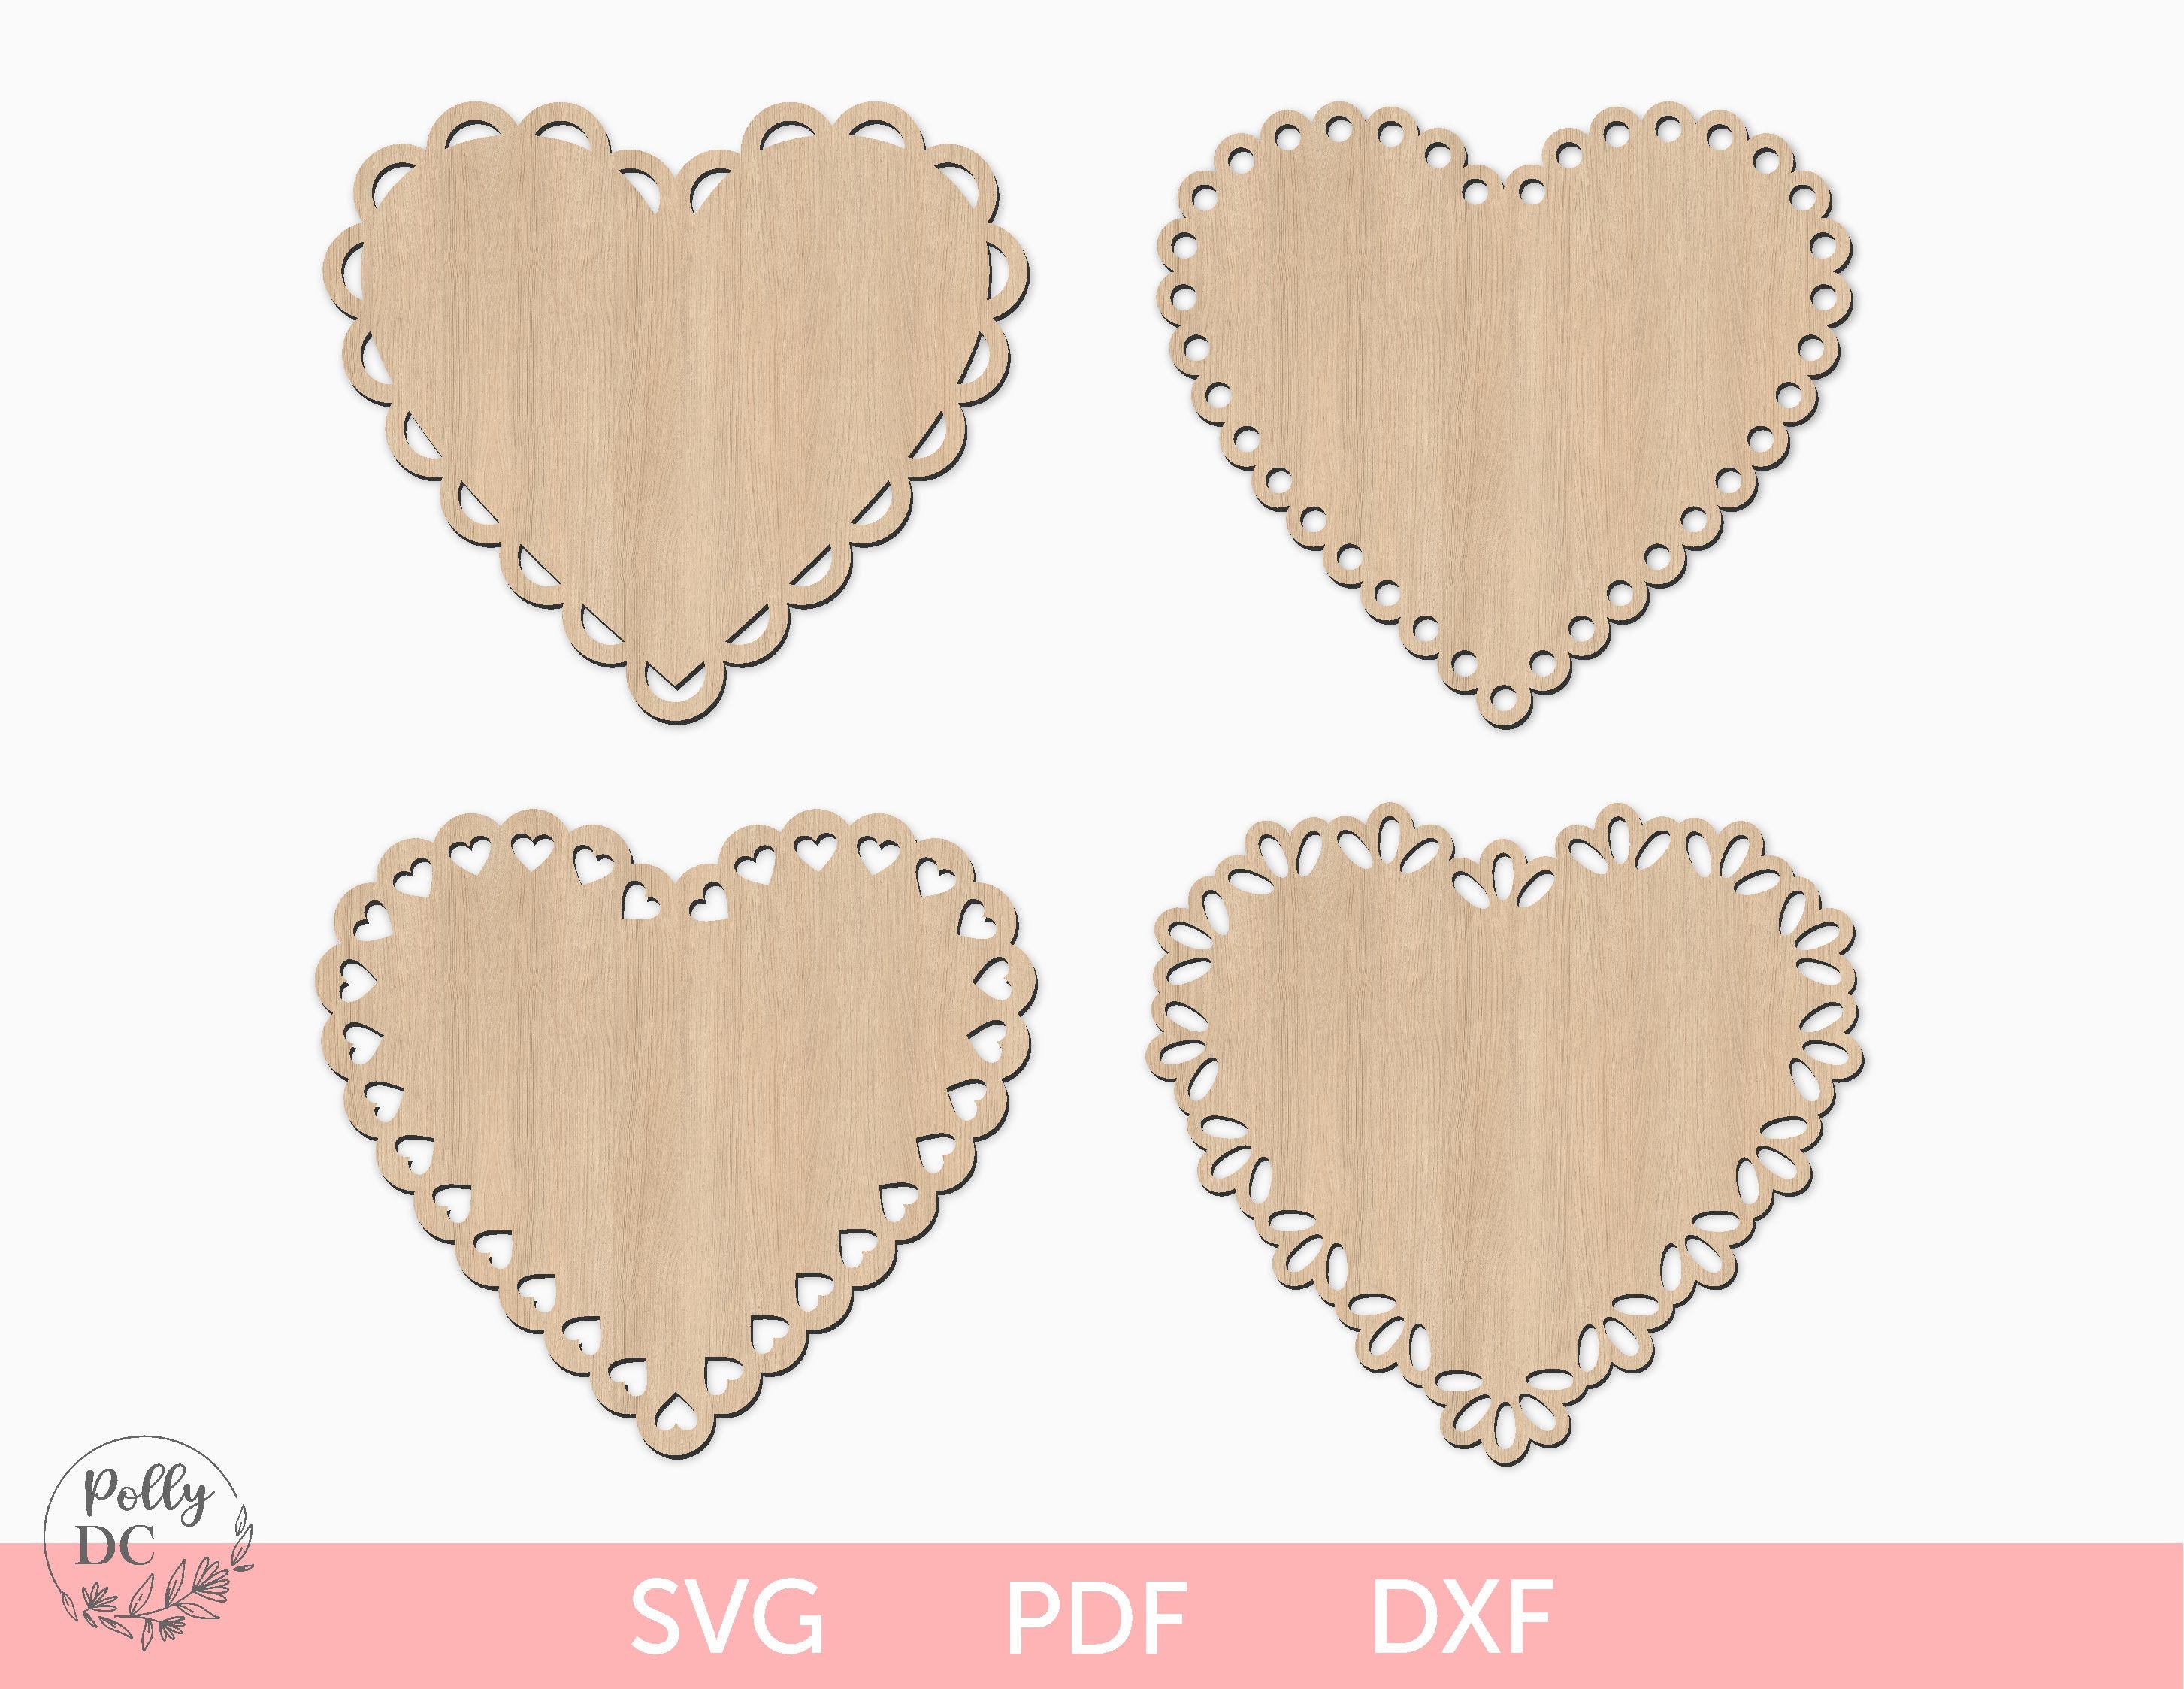  Creative Hobbies® Unfinished Wood Heart Cutout Shapes, Ready to  Paint or Decorate, 3.5 Inch Wide